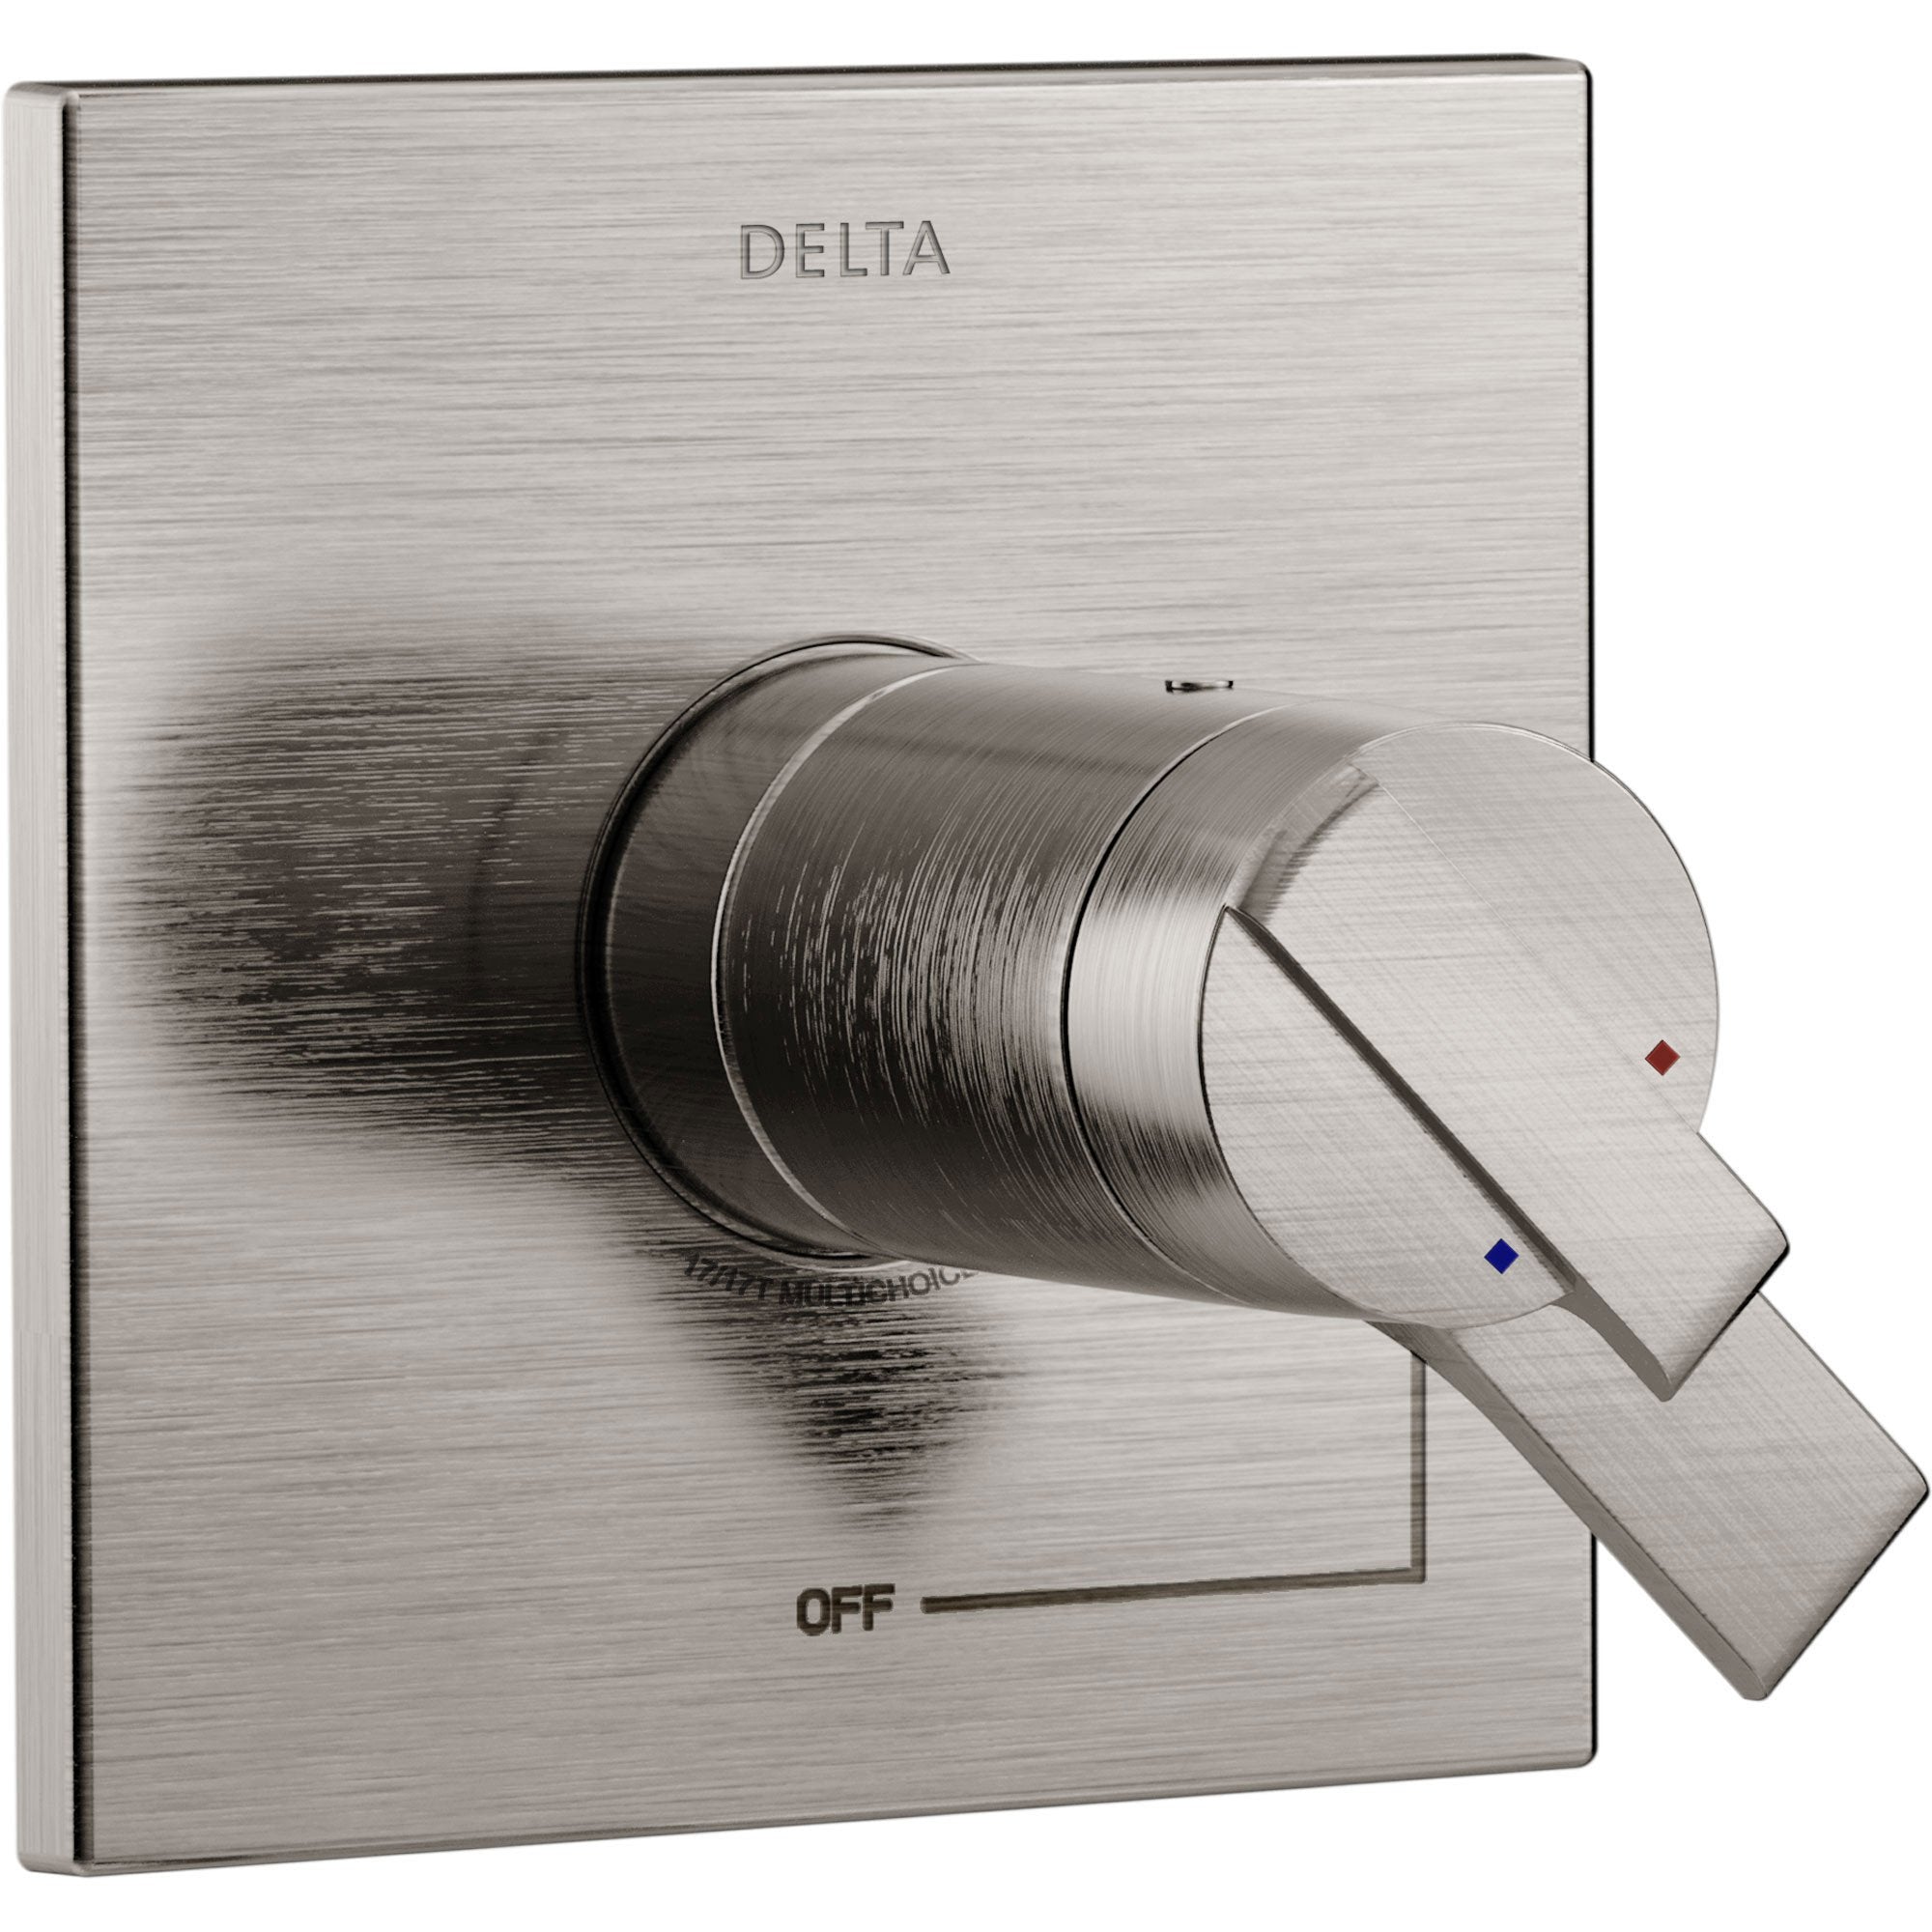 Delta Ara Modern Stainless Steel Finish TempAssure 17T Dual Temperature and Pressure Shower Faucet Control INCLUDES Rough-in Valve D1108V